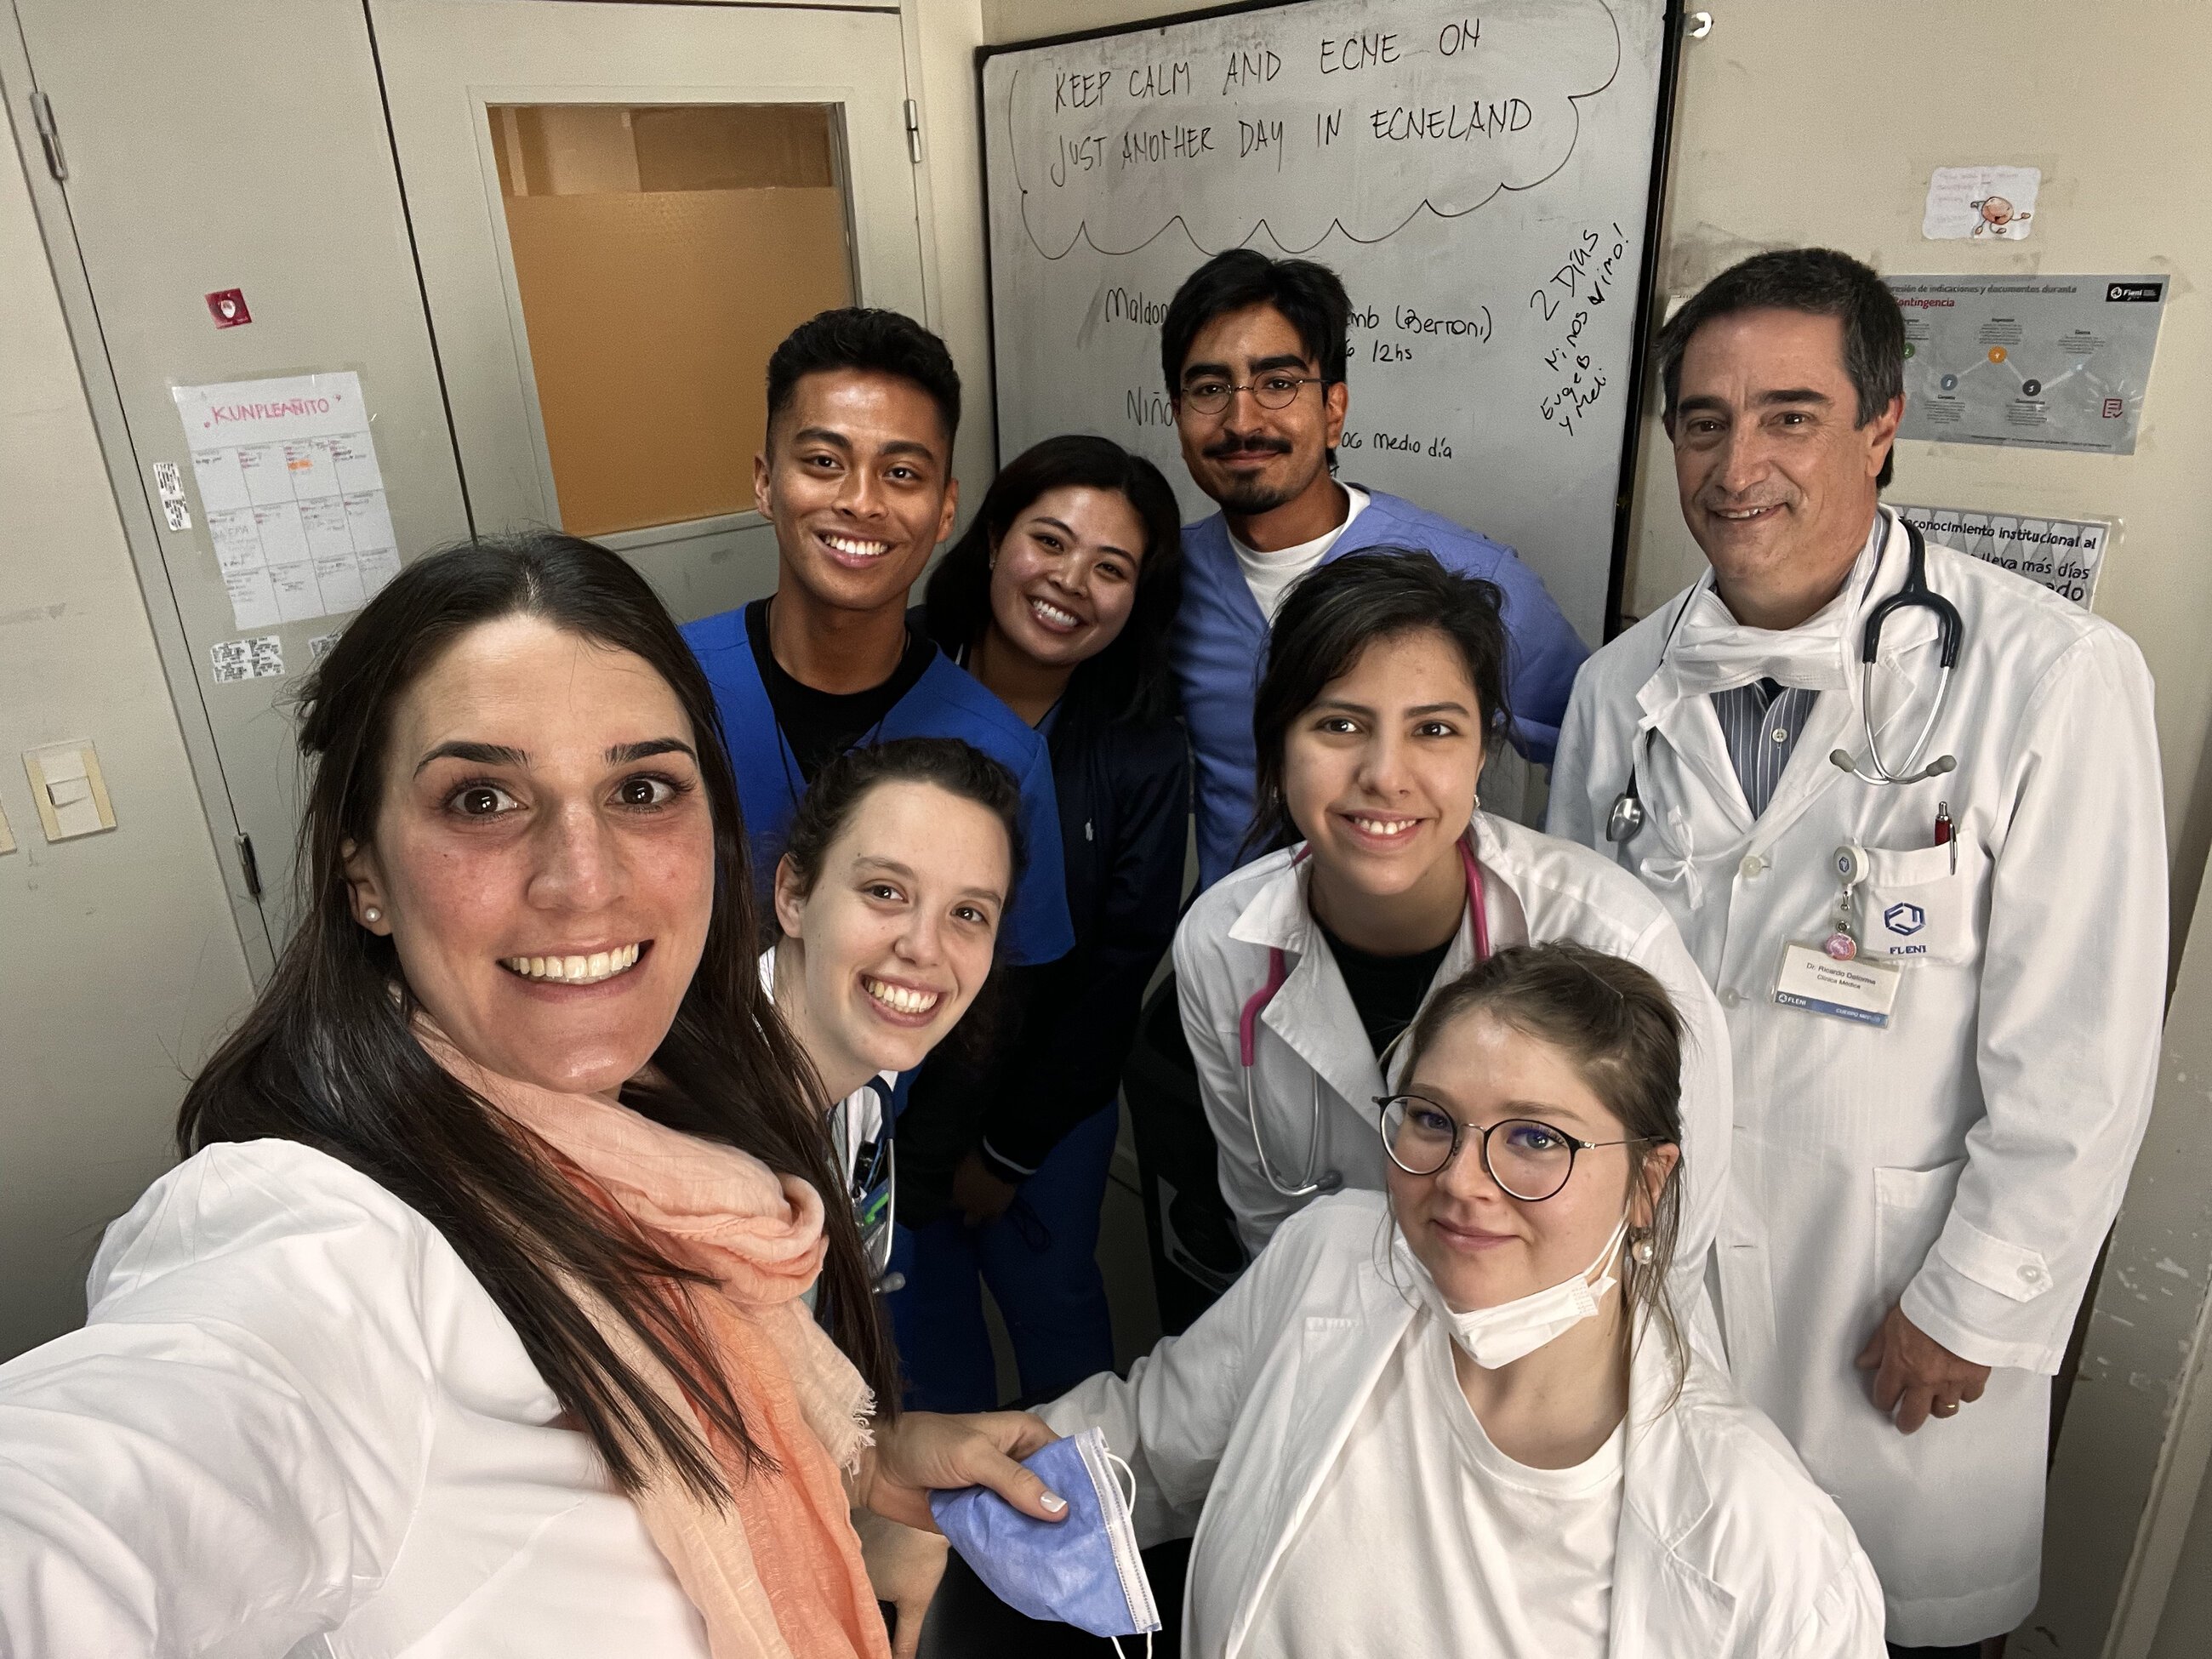 Selfie with the internal medicine residents and the attending physician.